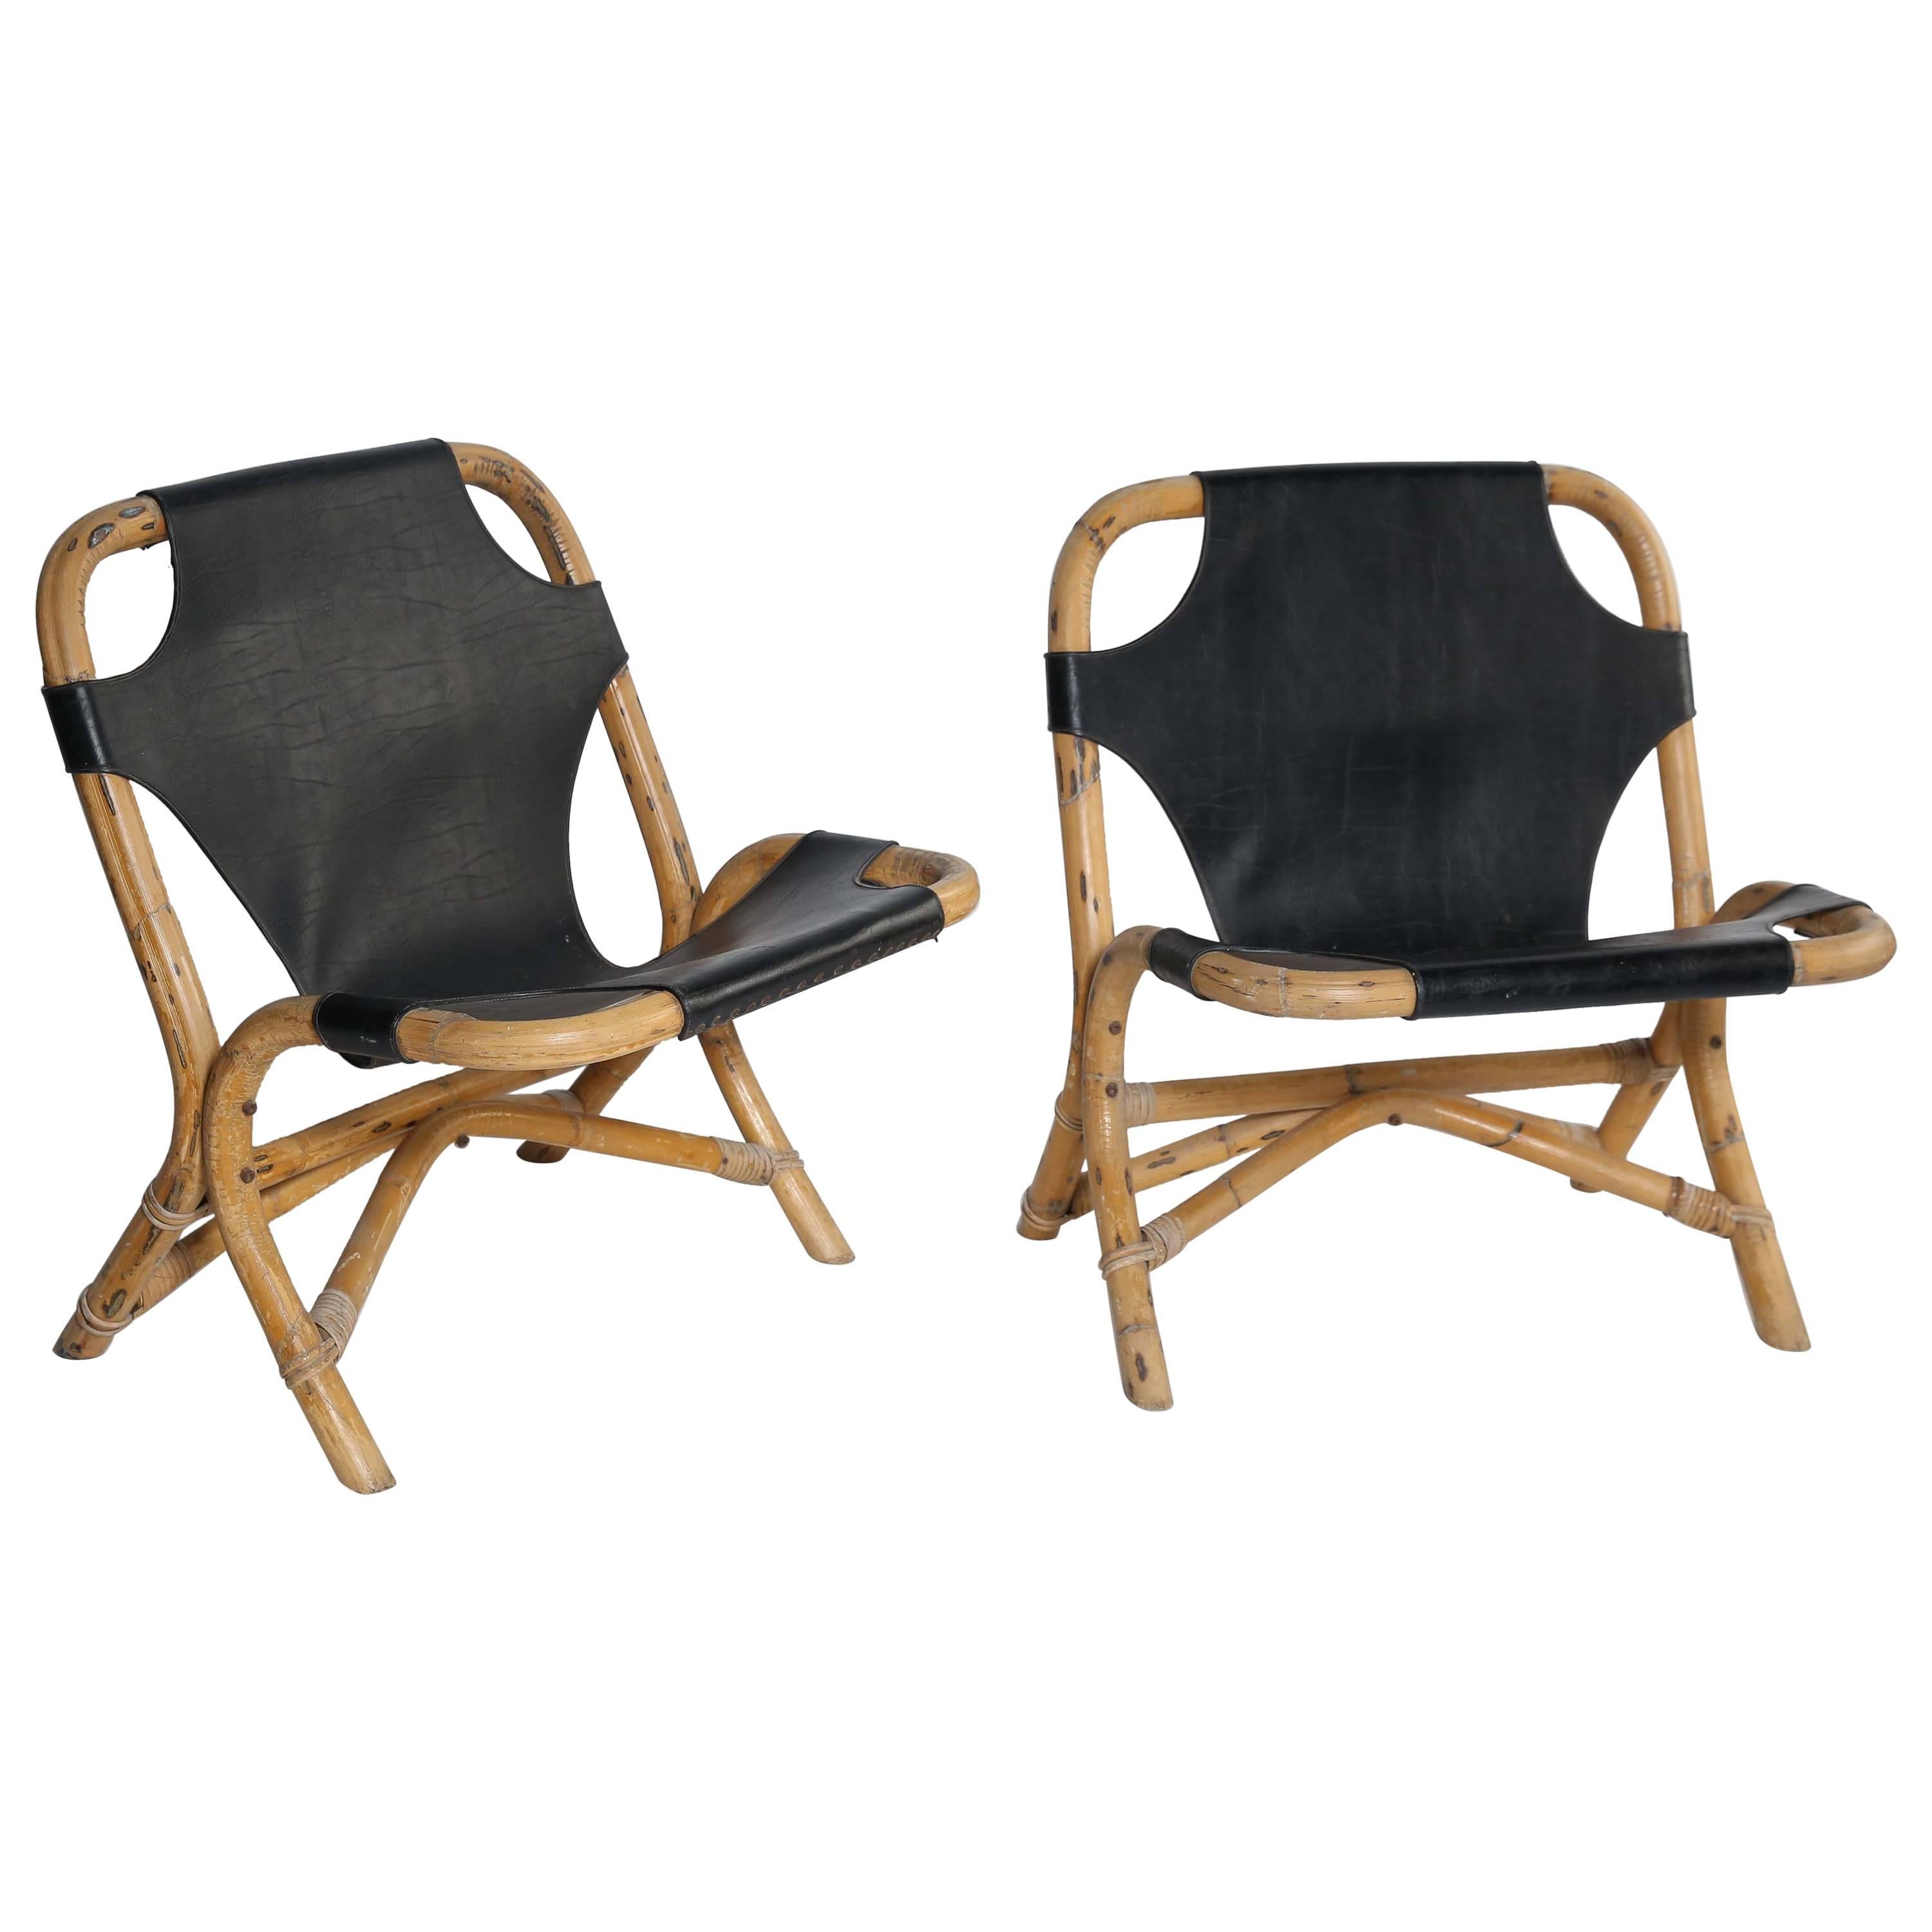 Pair of Bamboo and Leather Chairs